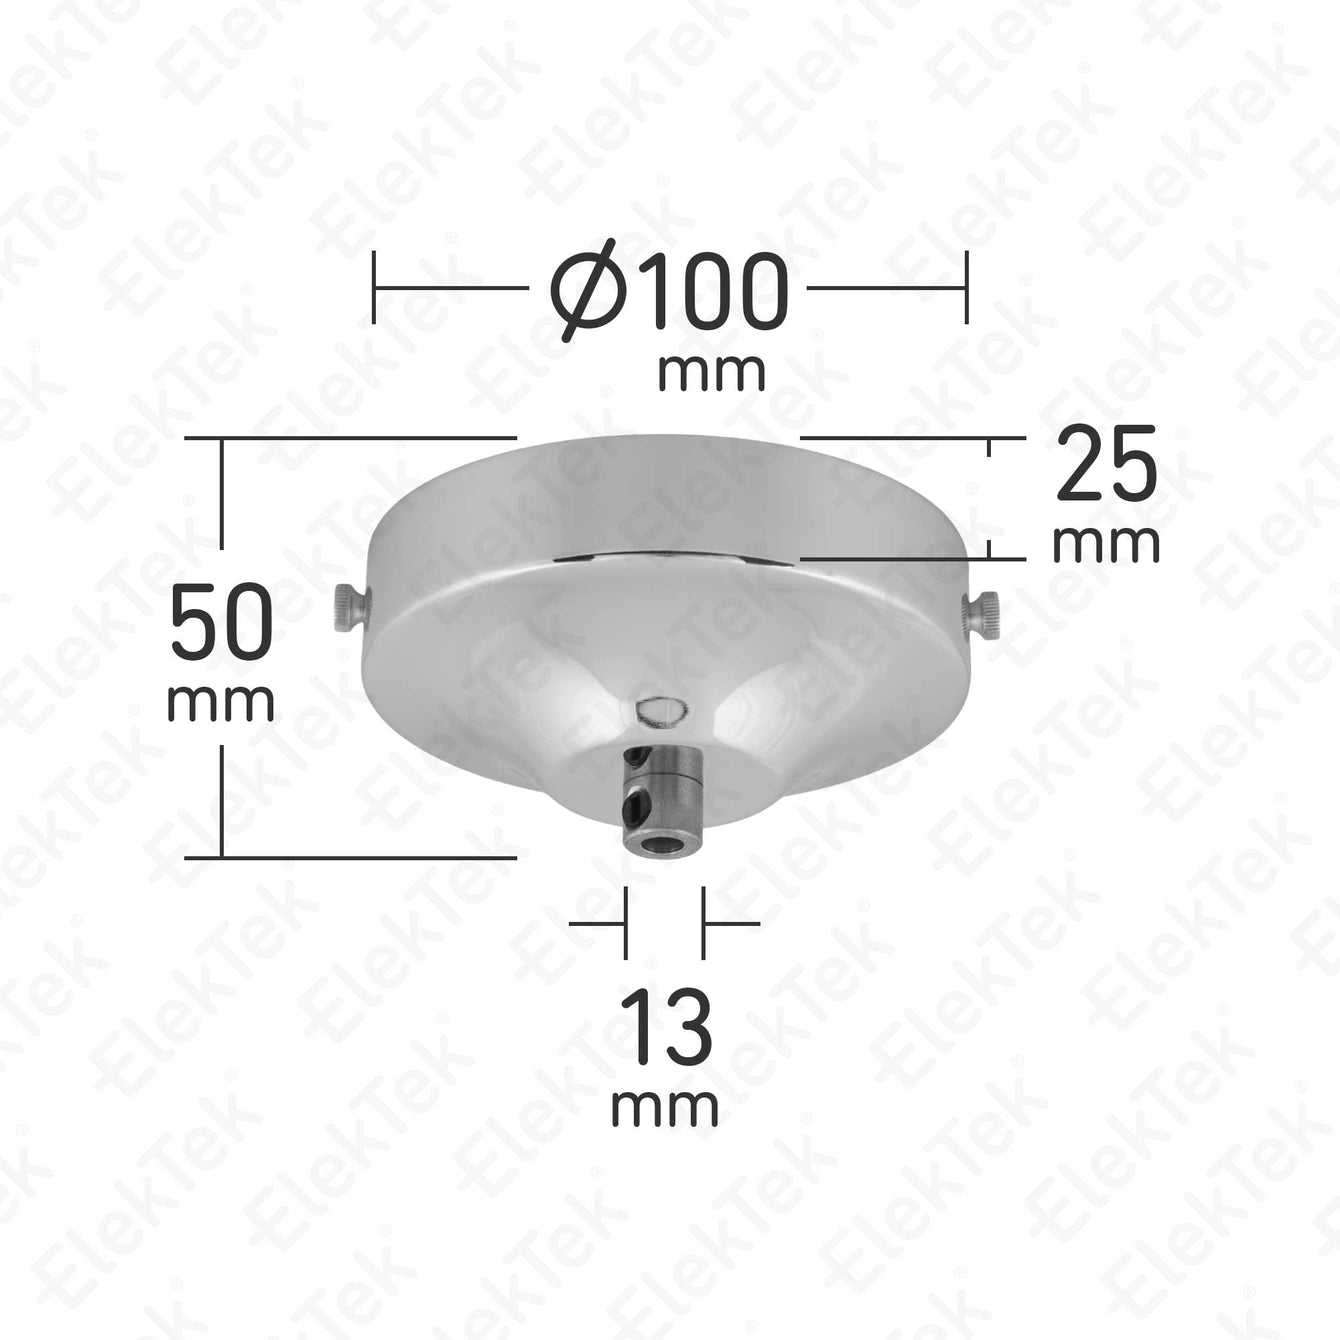 ElekTek 100mm Diameter Convex Ceiling Rose with Strap Bracket and Cord Grip Metallic Finishes Powder Coated Colours Chrome